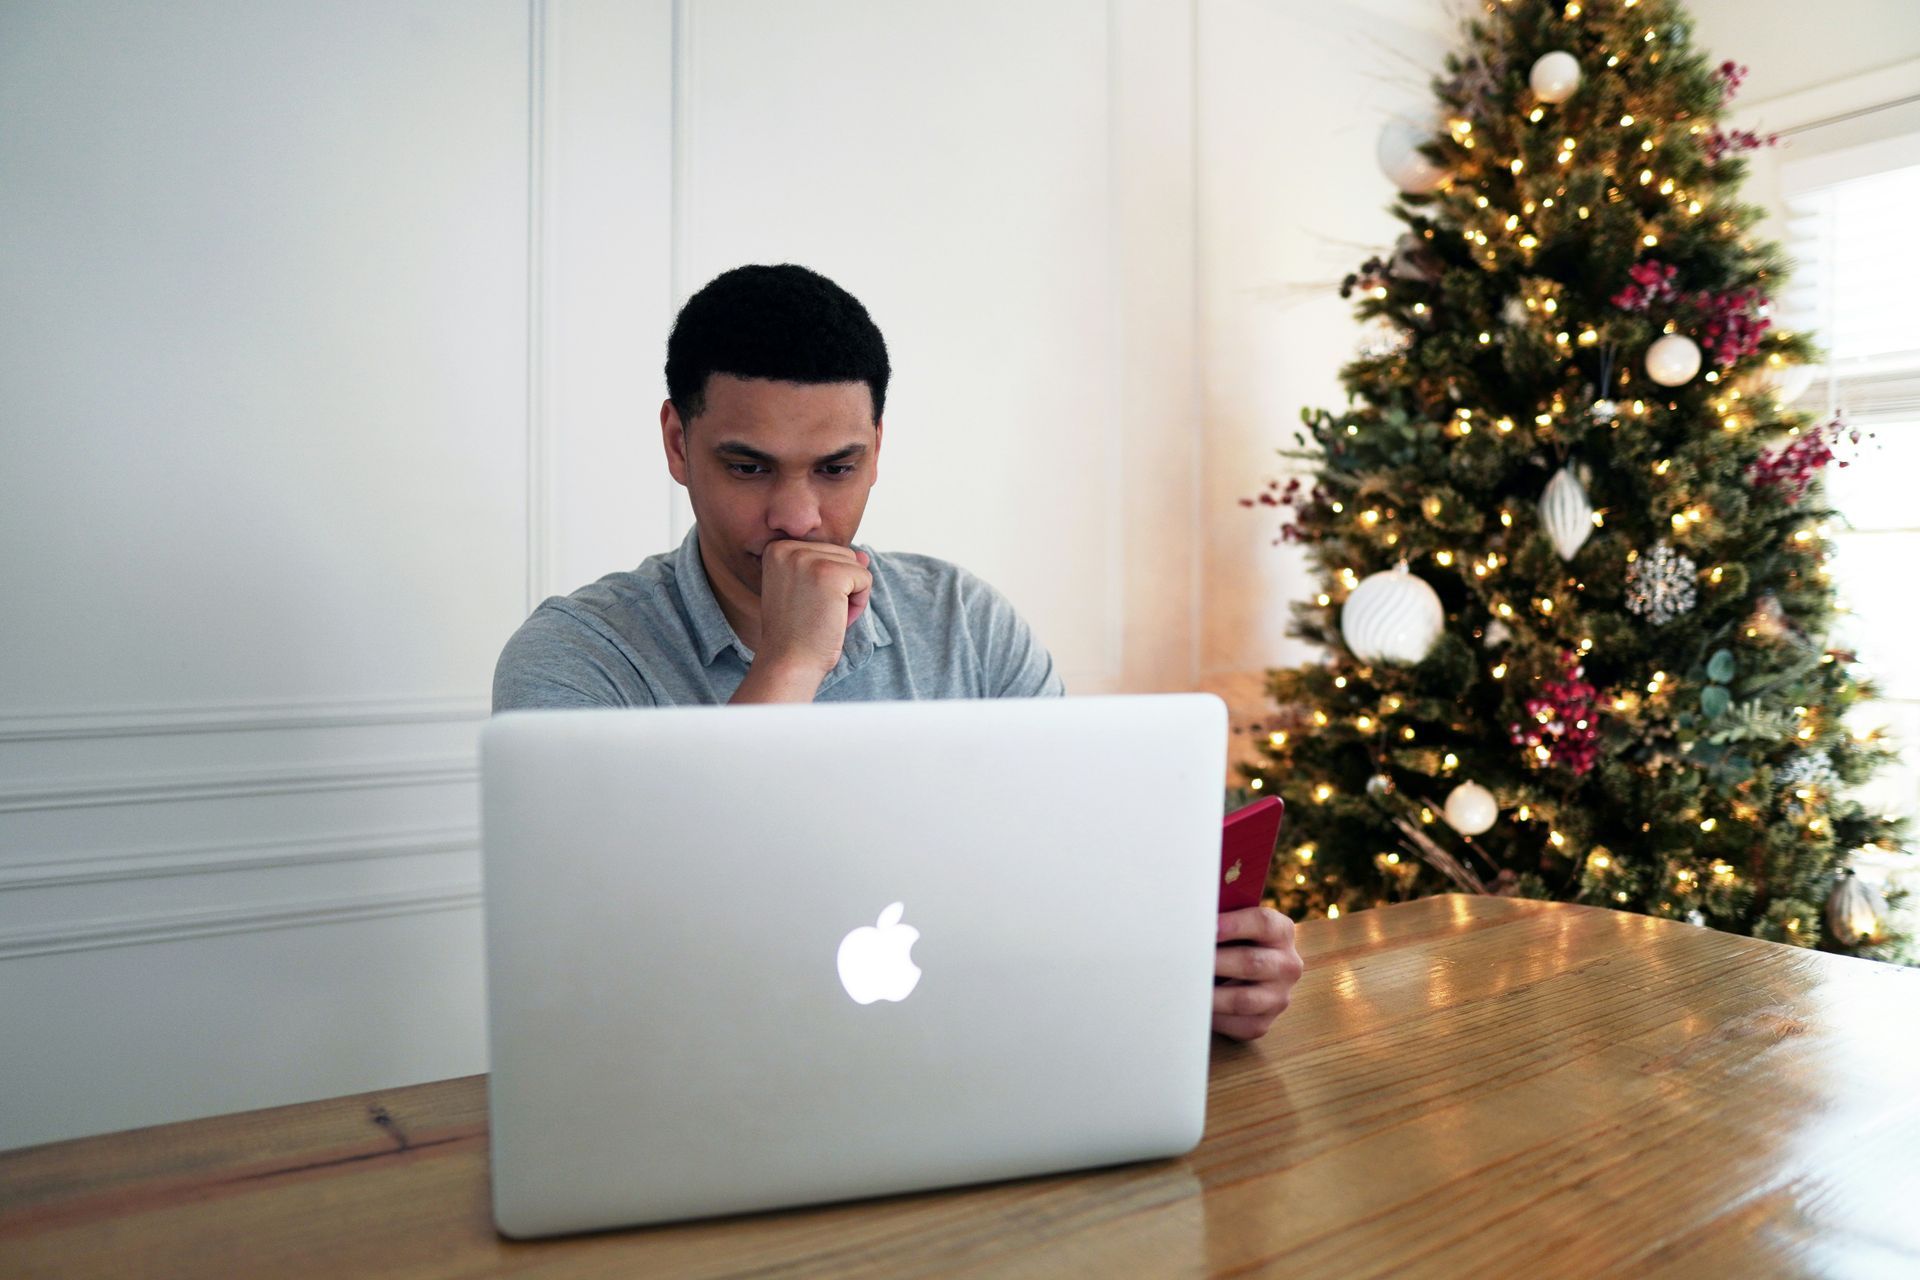 Man sitting at table, looking at laptop, with Christmas tree in background